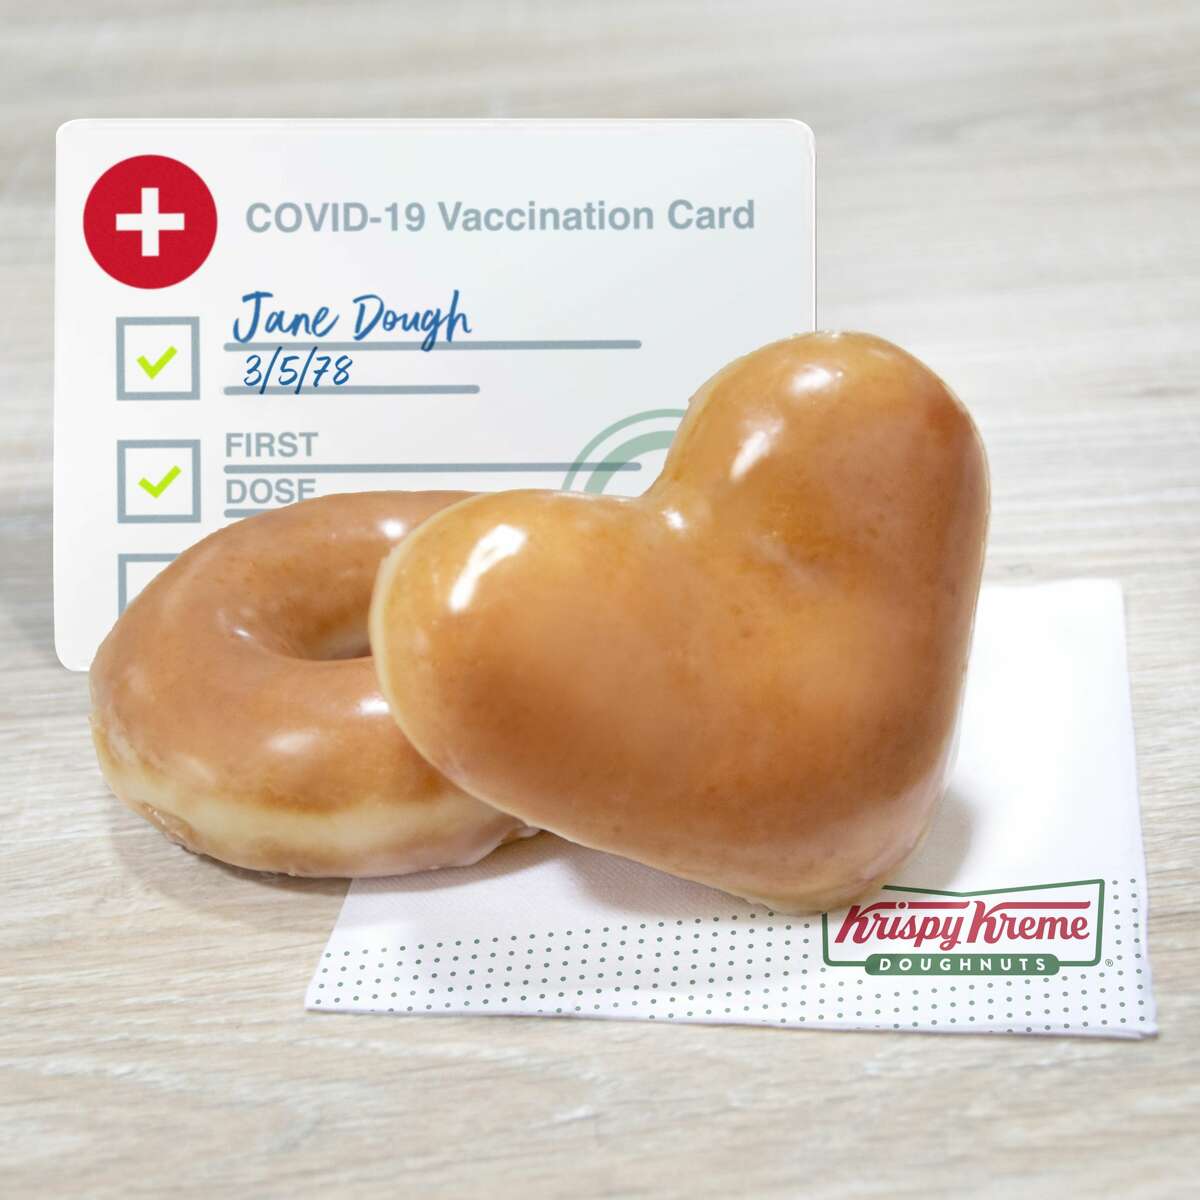 Customers with at least one COVID-19 vaccination shot get two free donuts through Sept. 5